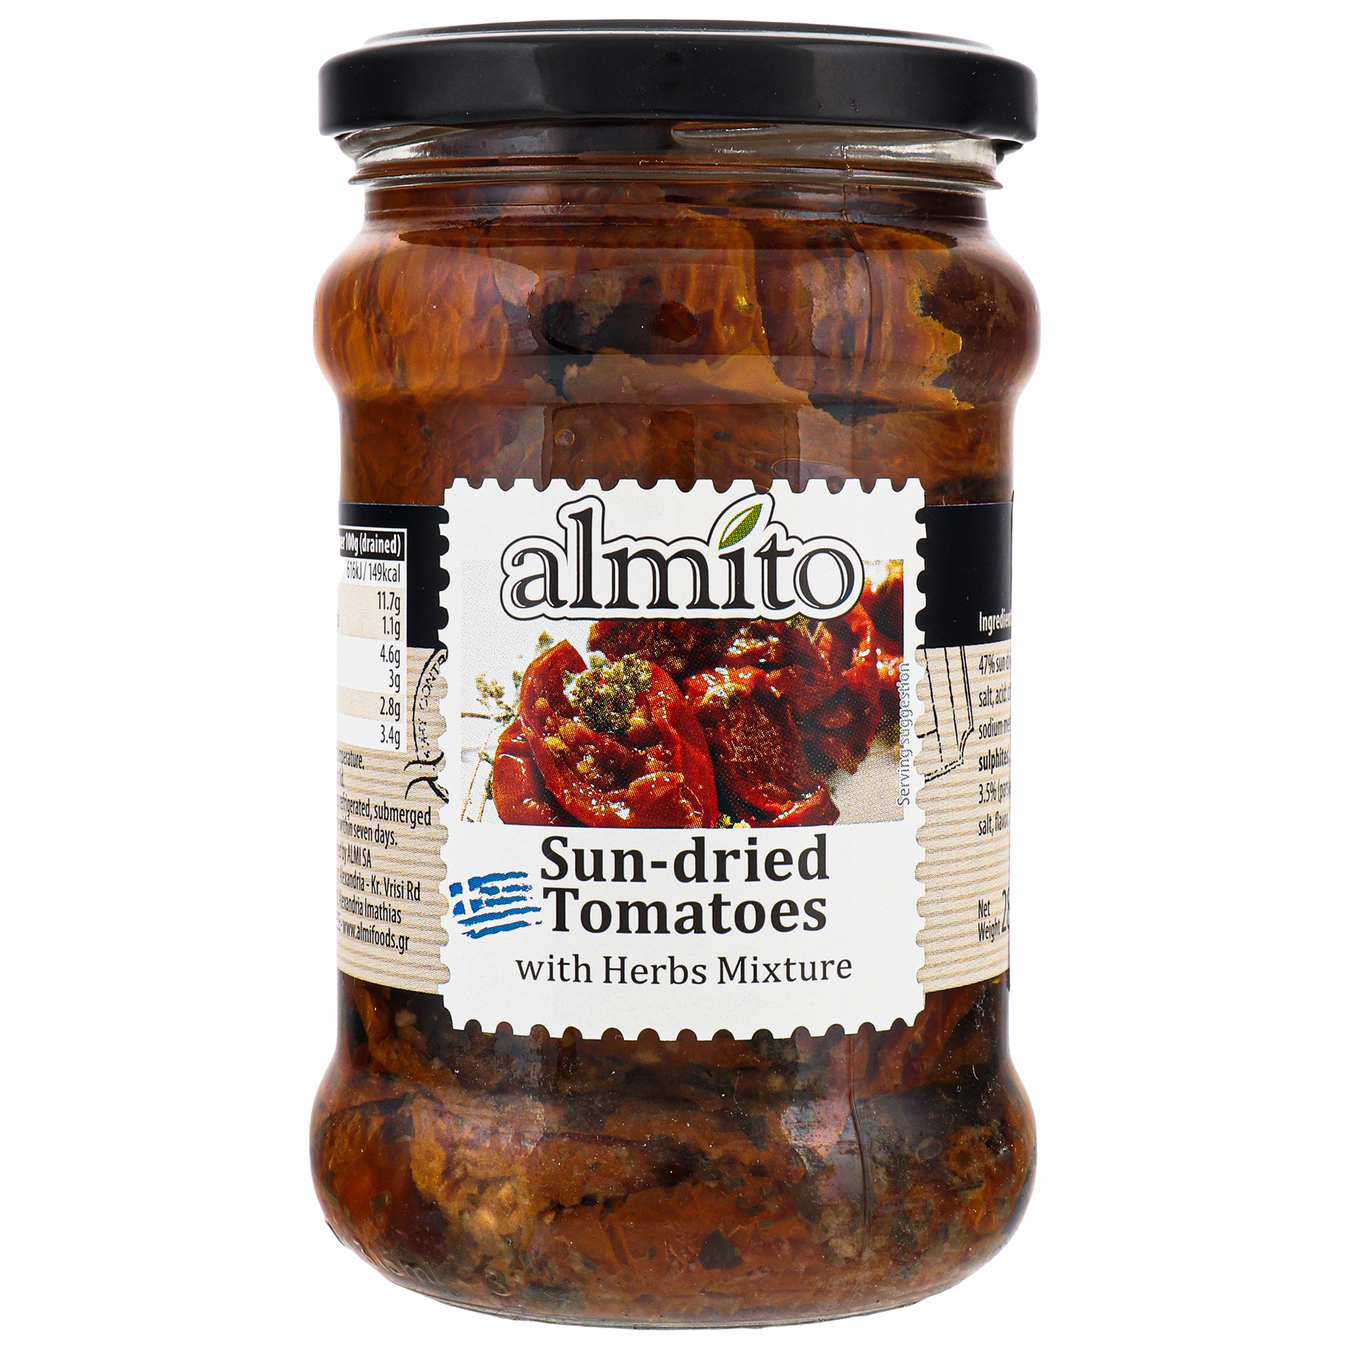 Tomatoes Almito sun-dried with Almito spice blend 280g